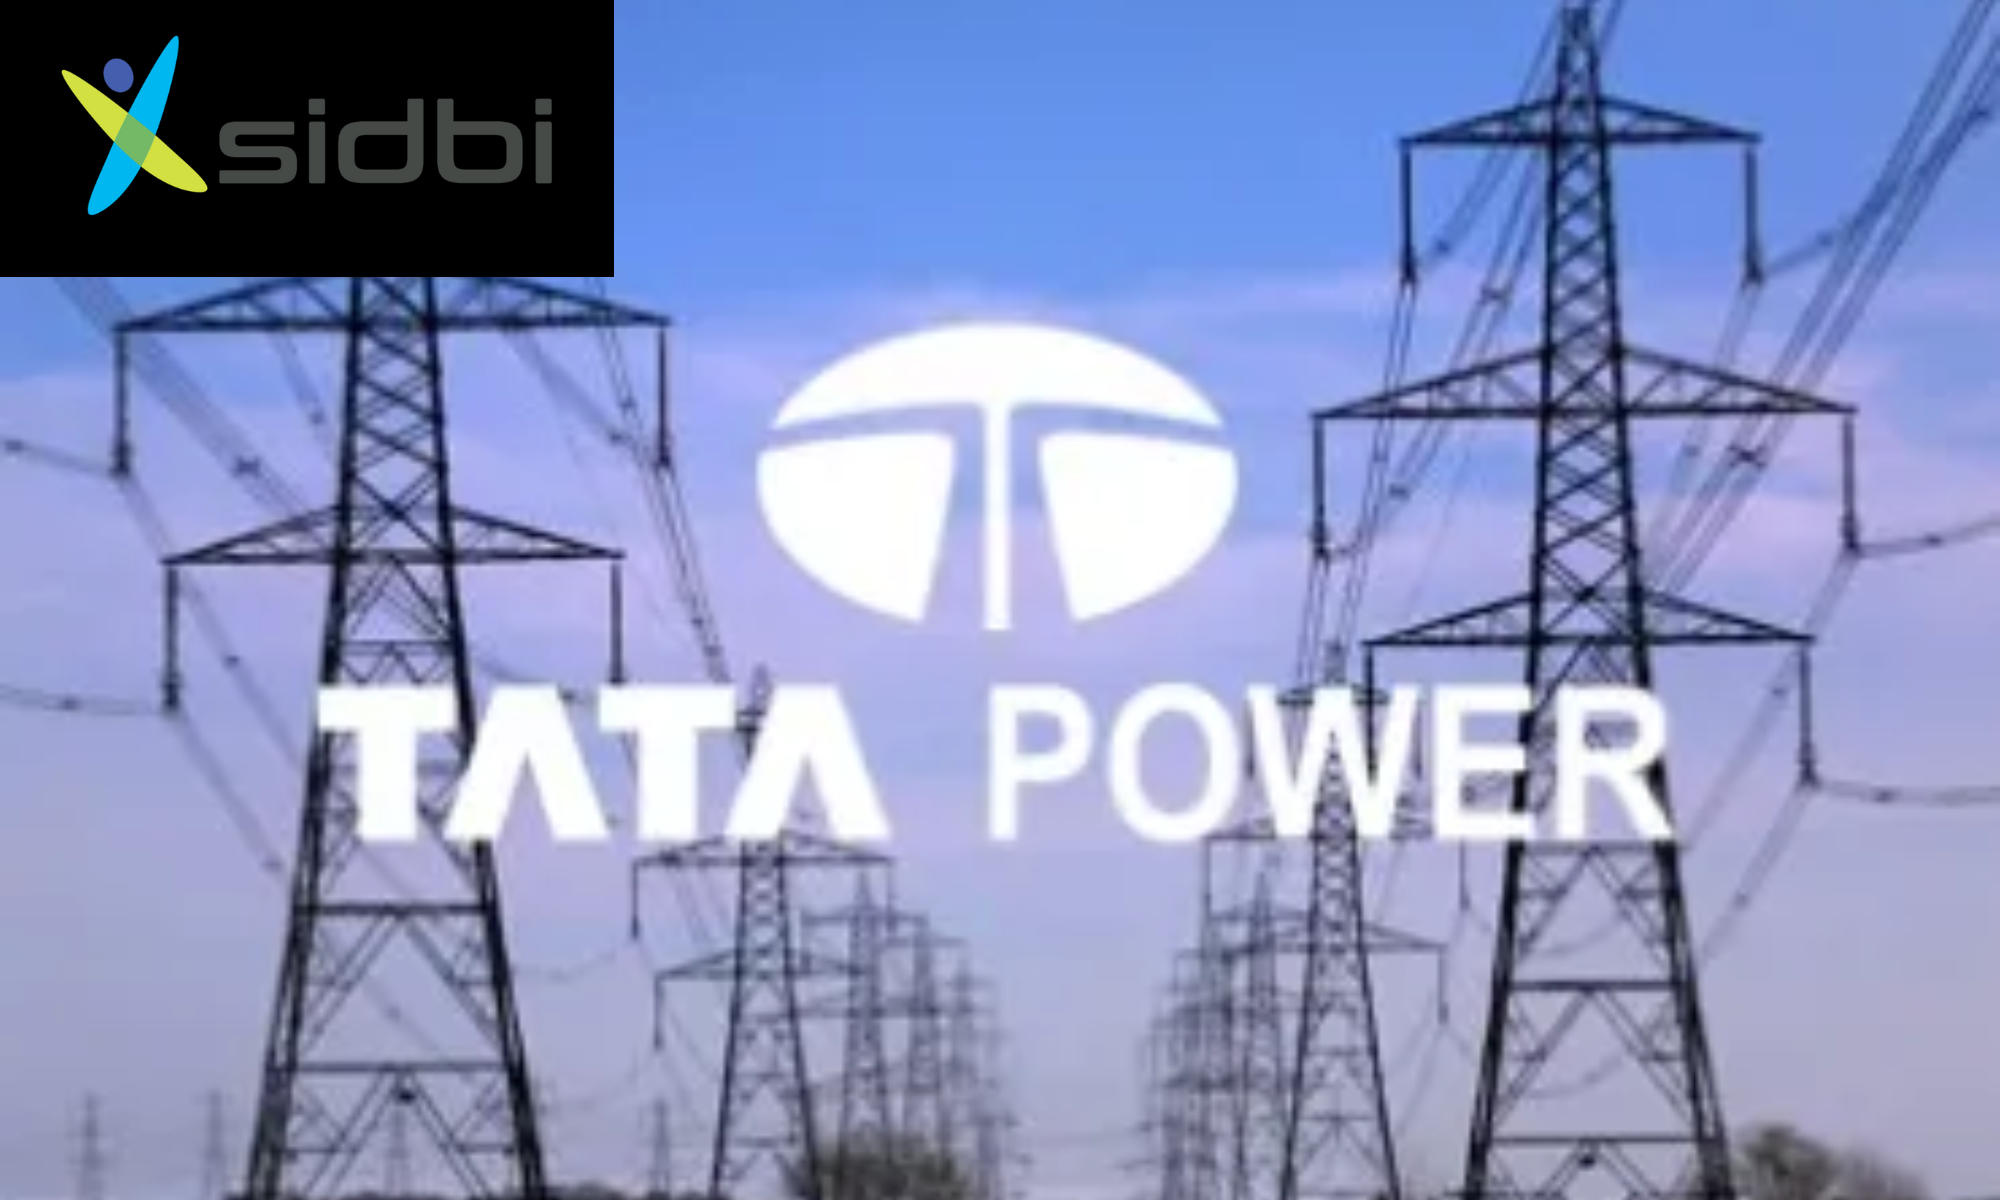 SIDBI and Tata Power's TPRMG collaborated to support green entrepreneurs_40.1